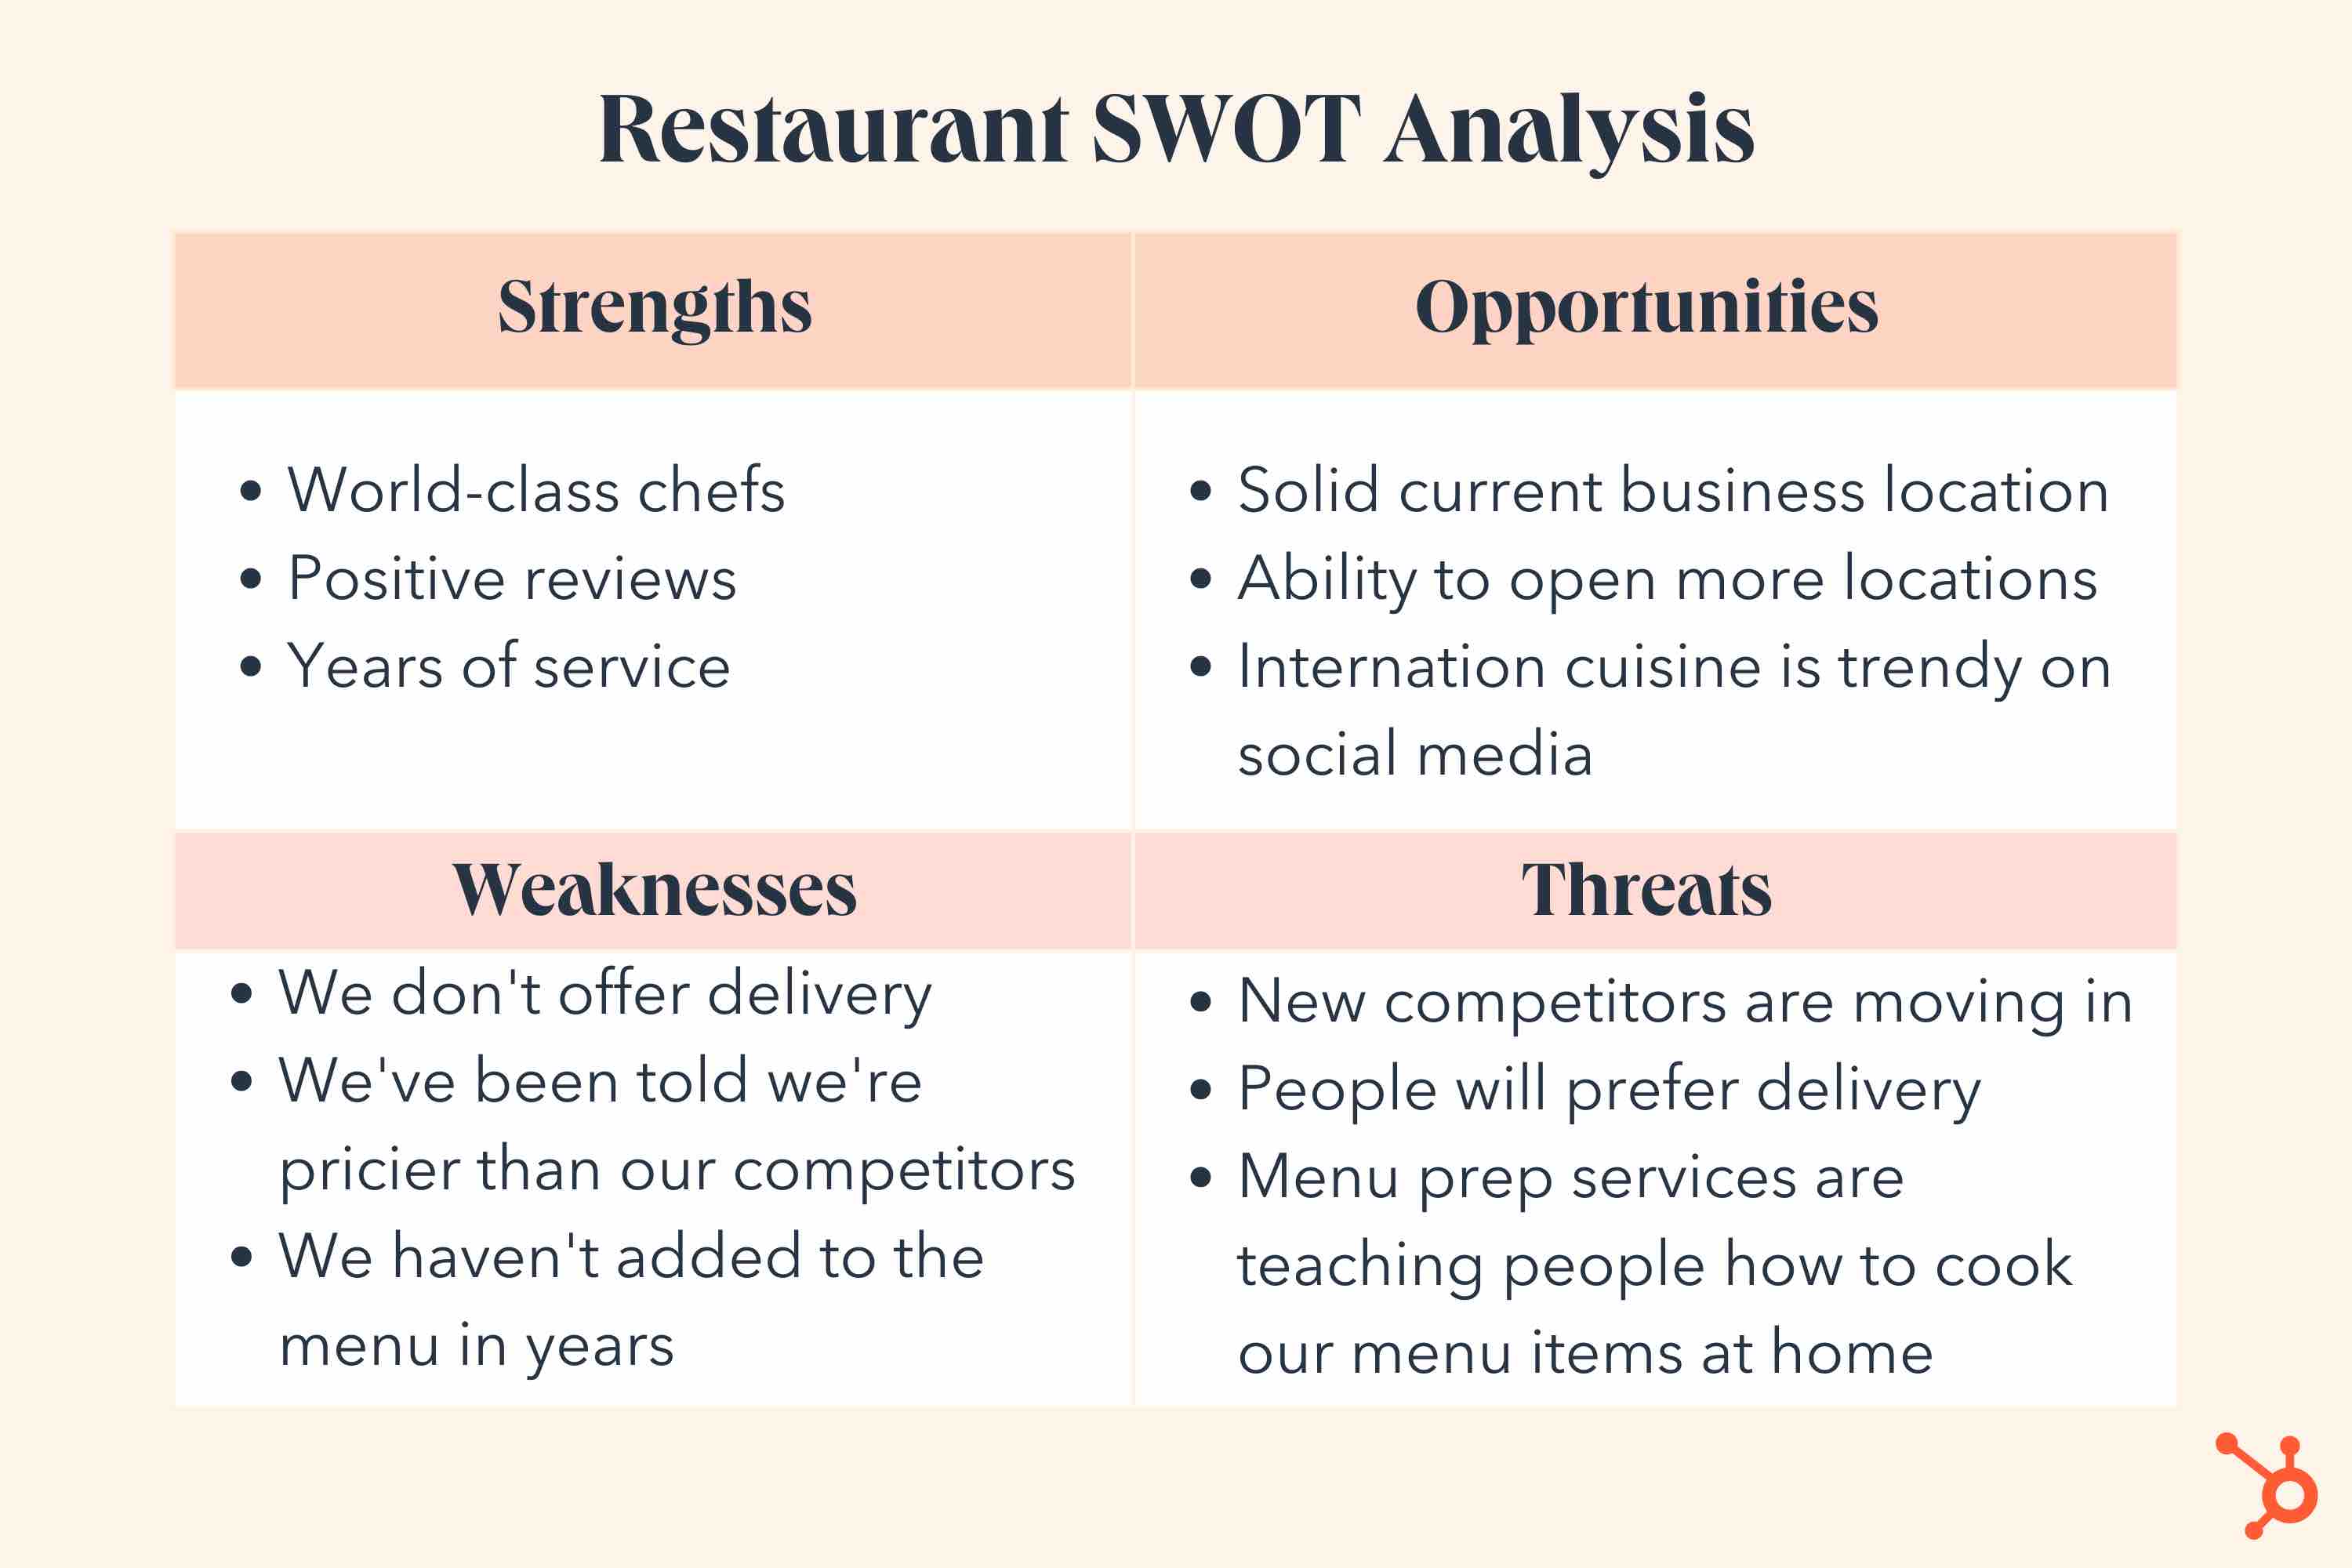 A SWOT analysis example for a restaurant small business.